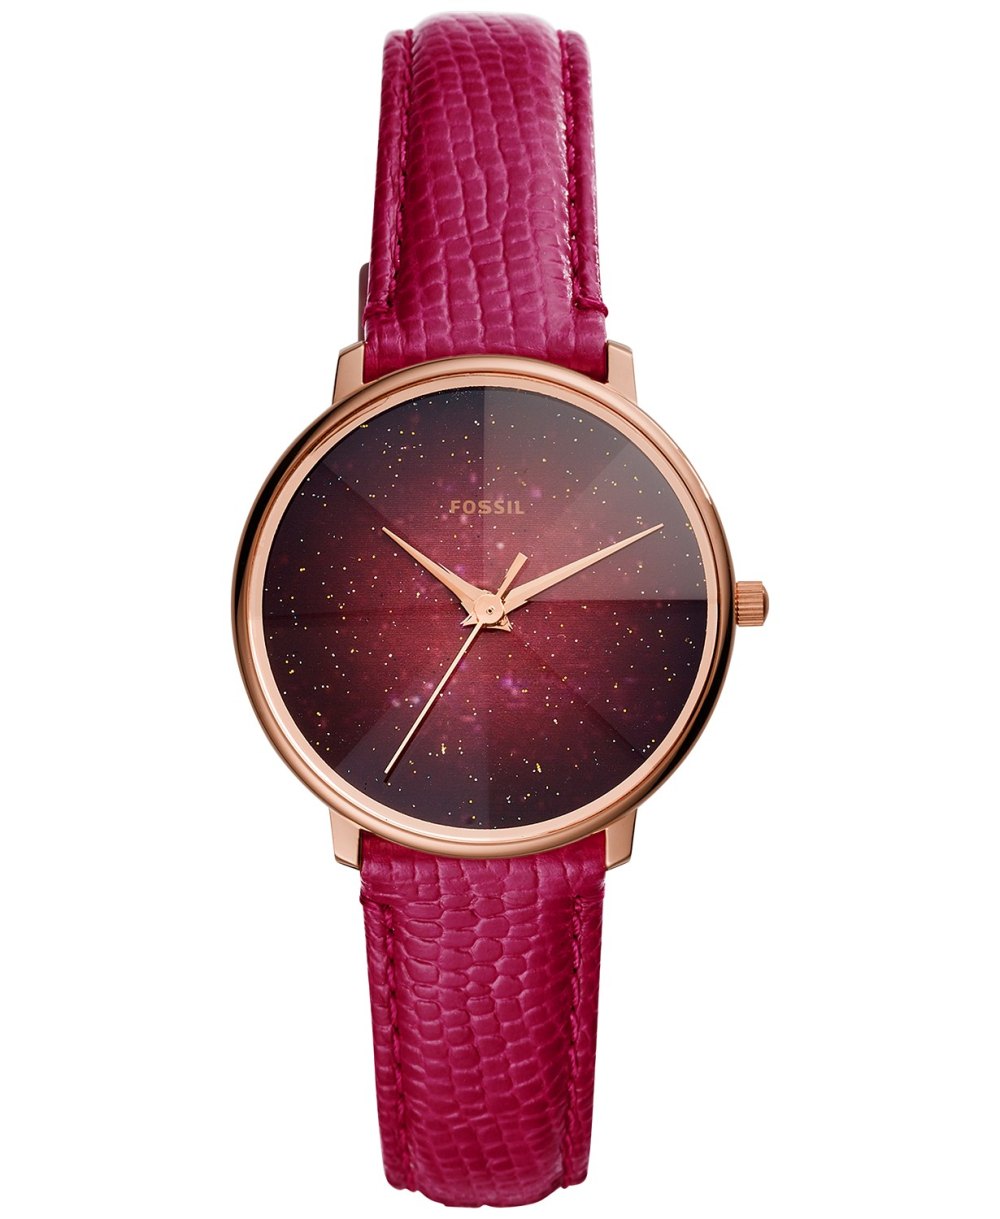 Fossil Women's Galaxy Leather Strap Watch Collection, 33mm (Pink)